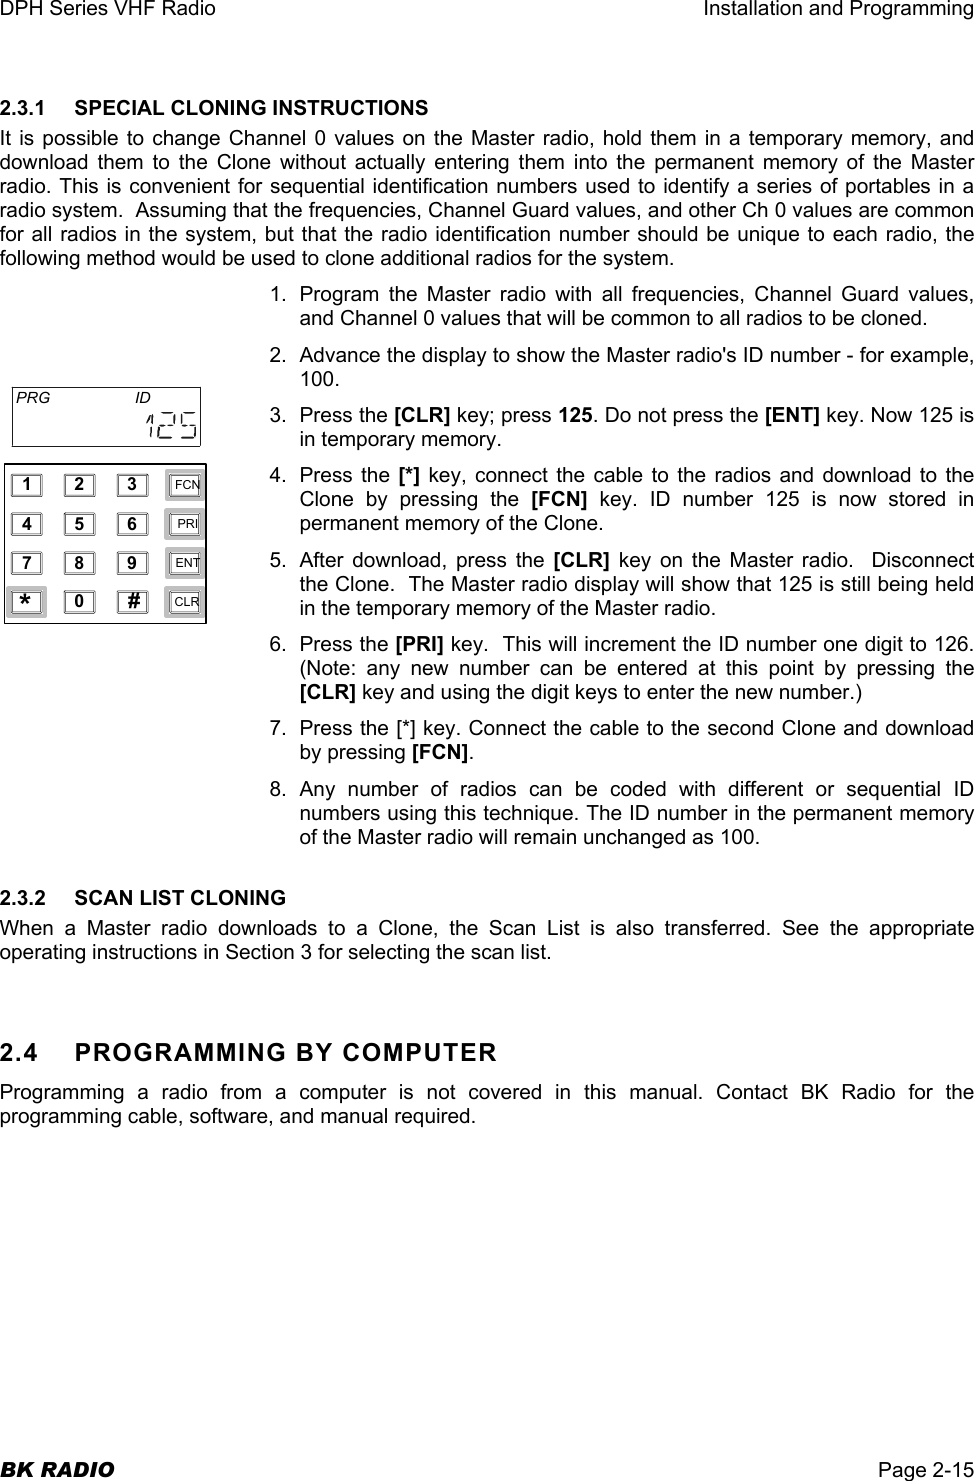 DPH Series VHF Radio  Installation and Programming  BK RADIO  Page 2-15 2.3.1 SPECIAL CLONING INSTRUCTIONS It is possible to change Channel 0 values on the Master radio, hold them in a temporary memory, and download them to the Clone without actually entering them into the permanent memory of the Master radio. This is convenient for sequential identification numbers used to identify a series of portables in a radio system.  Assuming that the frequencies, Channel Guard values, and other Ch 0 values are common for all radios in the system, but that the radio identification number should be unique to each radio, the following method would be used to clone additional radios for the system. 1.  Program the Master radio with all frequencies, Channel Guard values, and Channel 0 values that will be common to all radios to be cloned. 2.  Advance the display to show the Master radio&apos;s ID number - for example, 100. 3. Press the [CLR] key; press 125. Do not press the [ENT] key. Now 125 is in temporary memory. 4. Press the [*] key, connect the cable to the radios and download to the Clone by pressing the [FCN] key. ID number 125 is now stored in permanent memory of the Clone. 5.  After download, press the [CLR] key on the Master radio.  Disconnect the Clone.  The Master radio display will show that 125 is still being held in the temporary memory of the Master radio. 6. Press the [PRI] key.  This will increment the ID number one digit to 126. (Note: any new number can be entered at this point by pressing the [CLR] key and using the digit keys to enter the new number.) 7.  Press the [*] key. Connect the cable to the second Clone and download by pressing [FCN]. 8. Any number of radios can be coded with different or sequential ID numbers using this technique. The ID number in the permanent memory of the Master radio will remain unchanged as 100. 2.3.2  SCAN LIST CLONING When a Master radio downloads to a Clone, the Scan List is also transferred. See the appropriate operating instructions in Section 3 for selecting the scan list.  2.4  PROGRAMMING BY COMPUTER Programming a radio from a computer is not covered in this manual. Contact BK Radio for the programming cable, software, and manual required. 1234567890*#CLRFCNPRIENTPRG ID